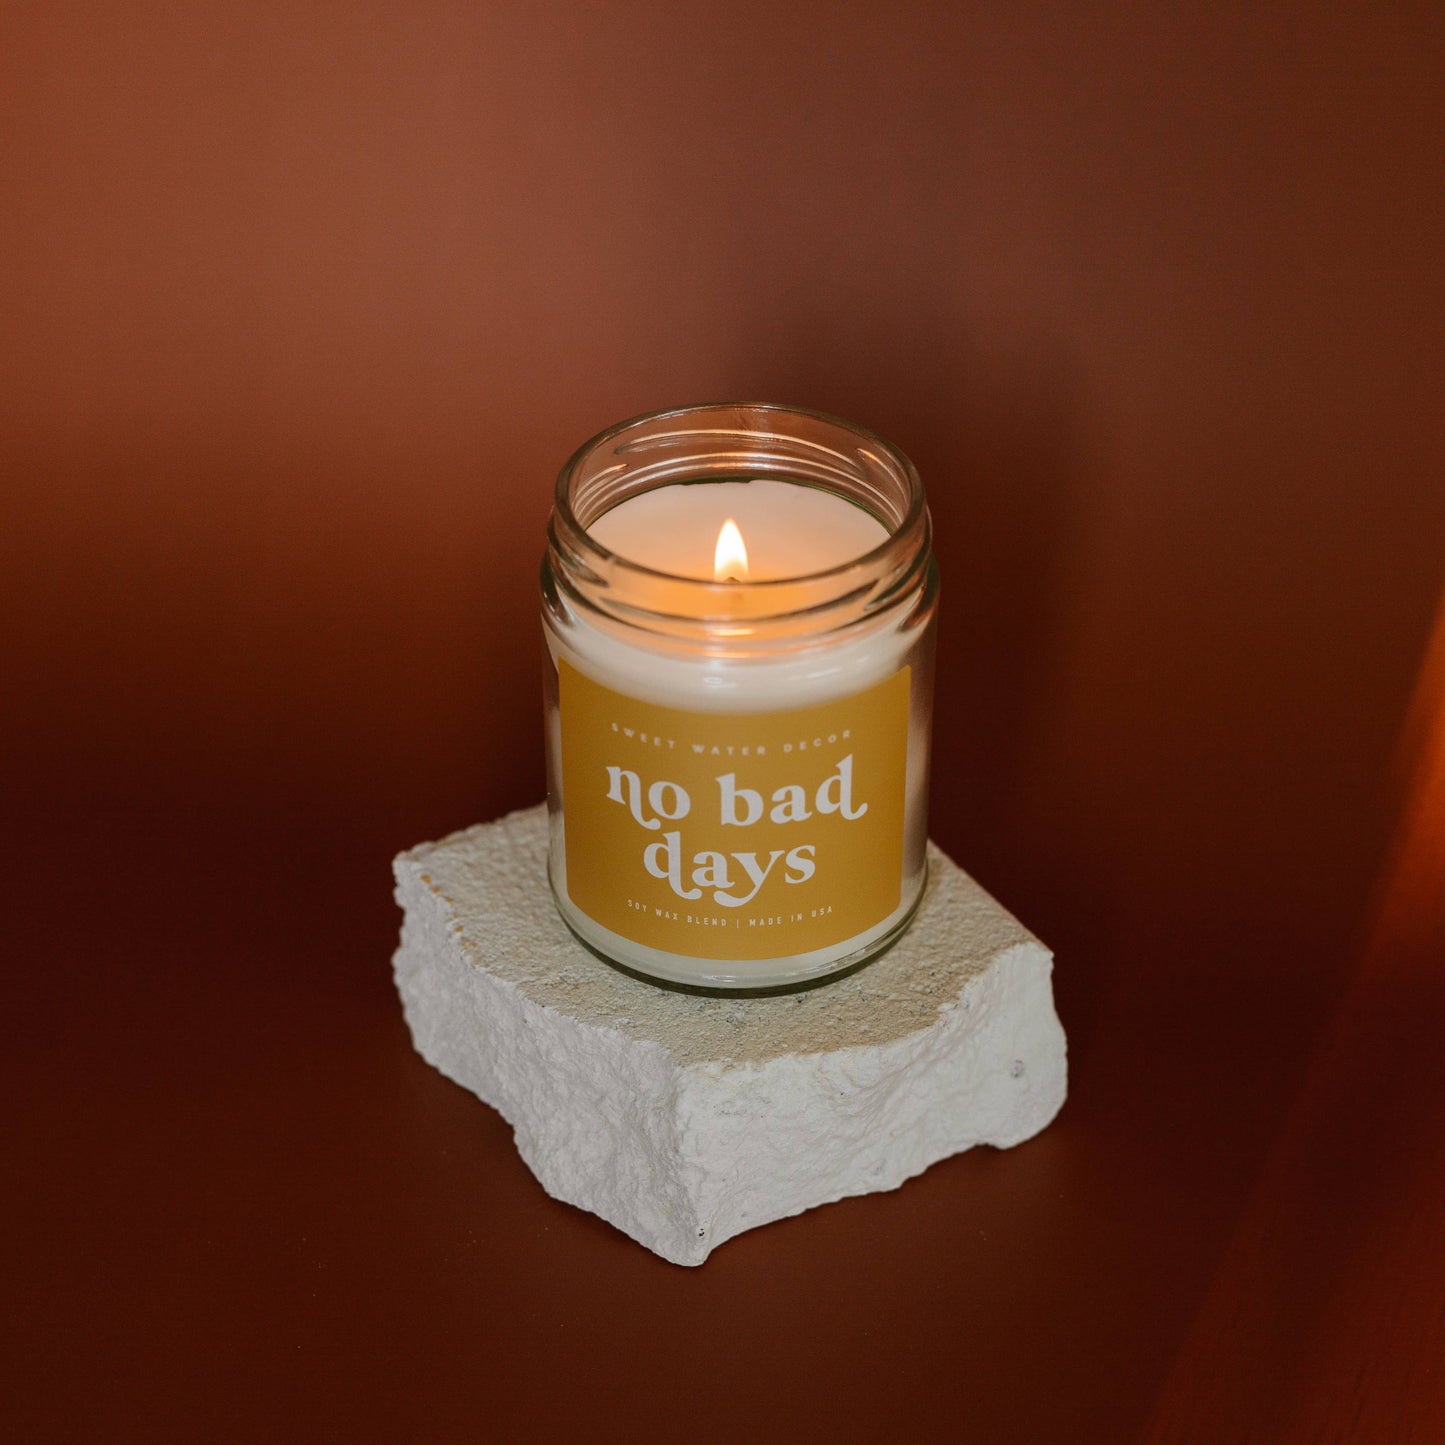 No Bad Days 9 oz Soy Candle - Home Decor & Gifts